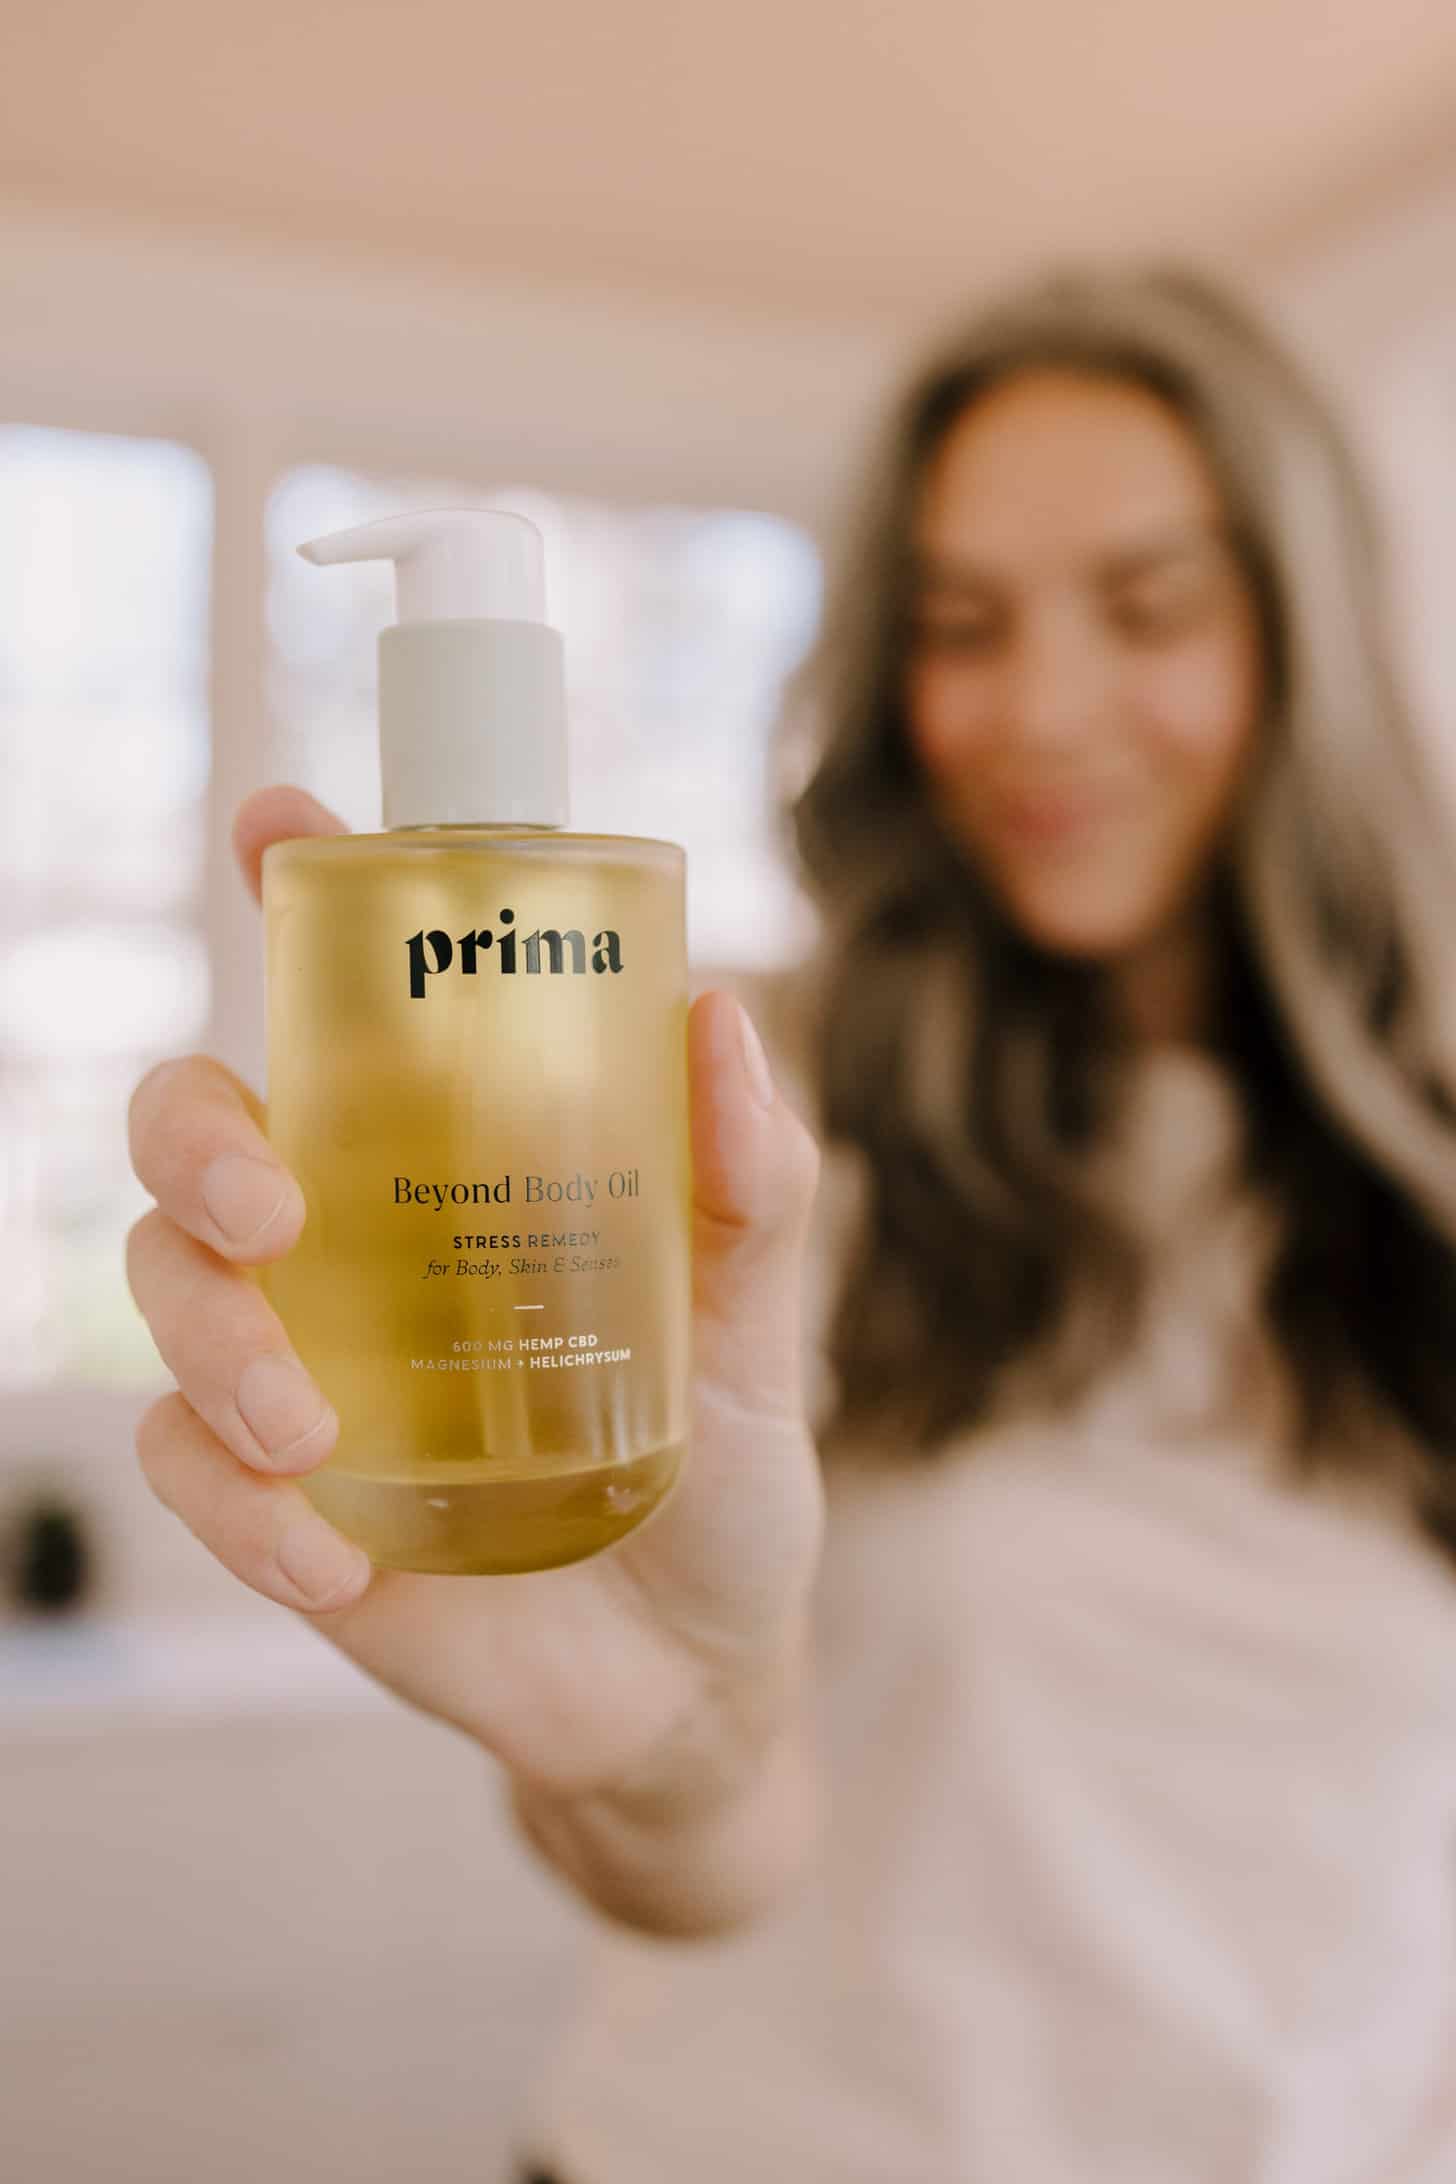 a bottle of prima beyond body oil is held up to the camera while a woman stands in the background